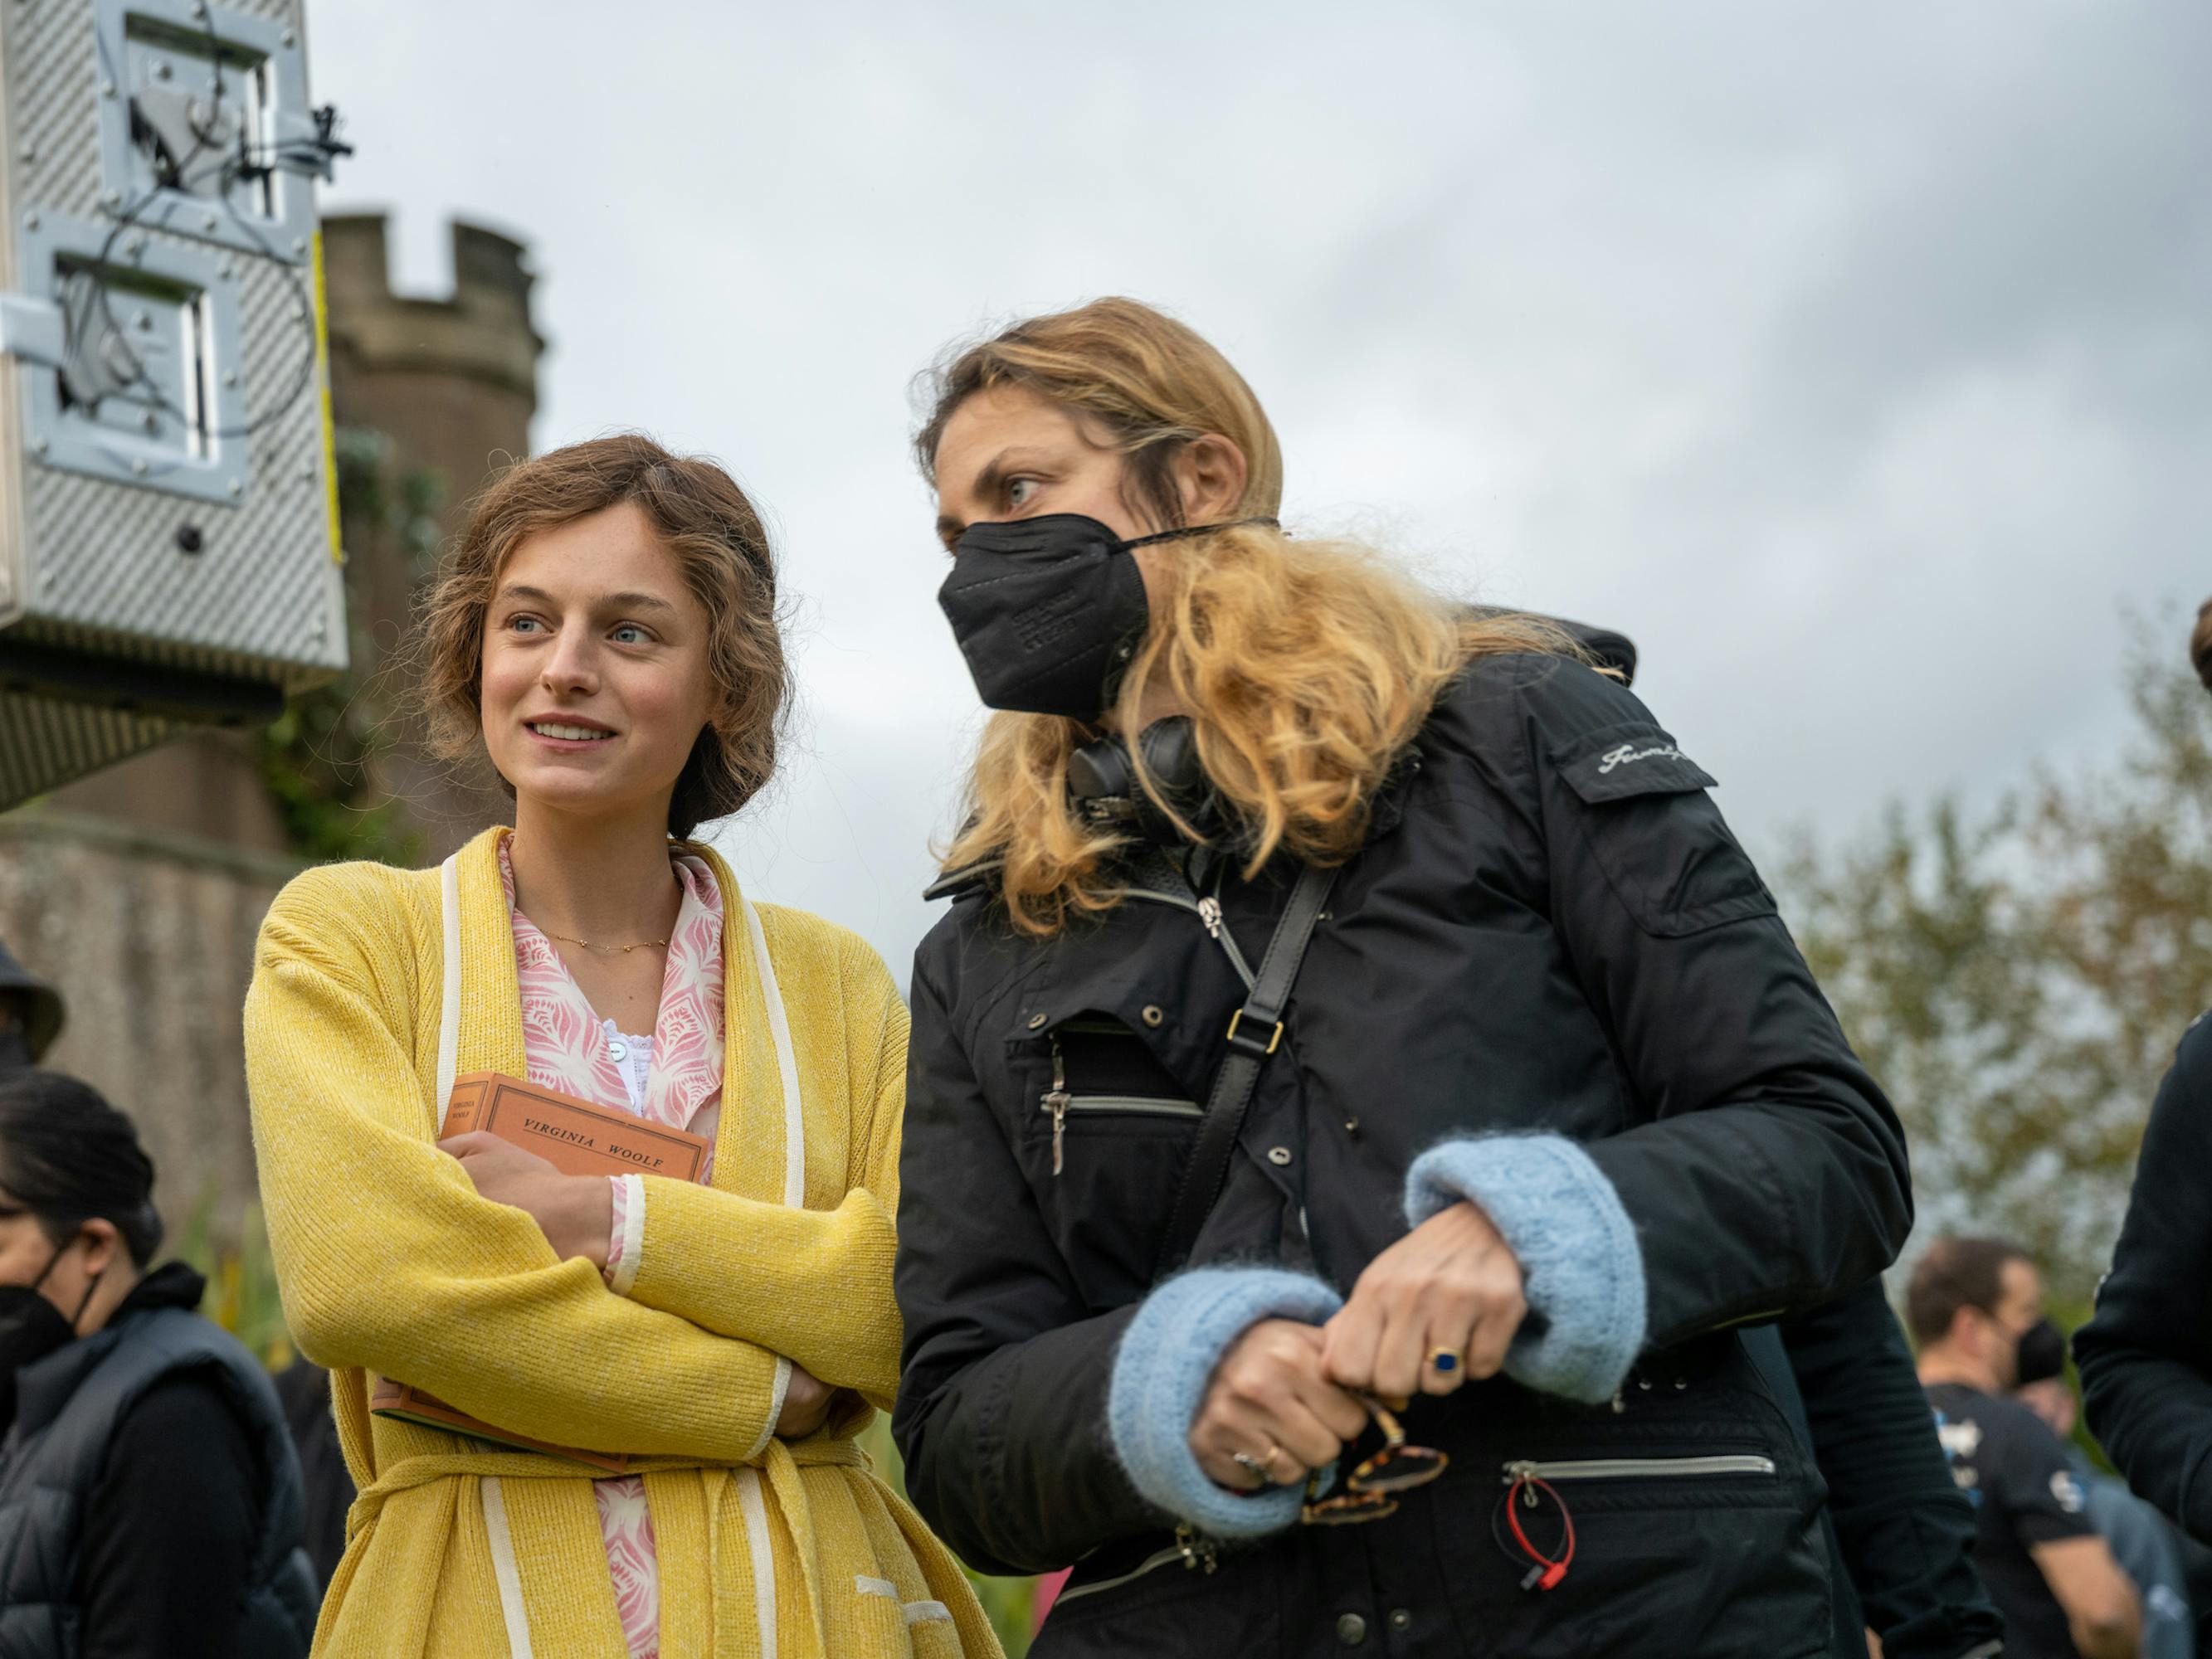 Connie (Emma Corrin) and Laure de Clermont-Tonnerre stand together on set. Corrin wears a yellow robe and Clermont-Tonnerre wears a black puffer.